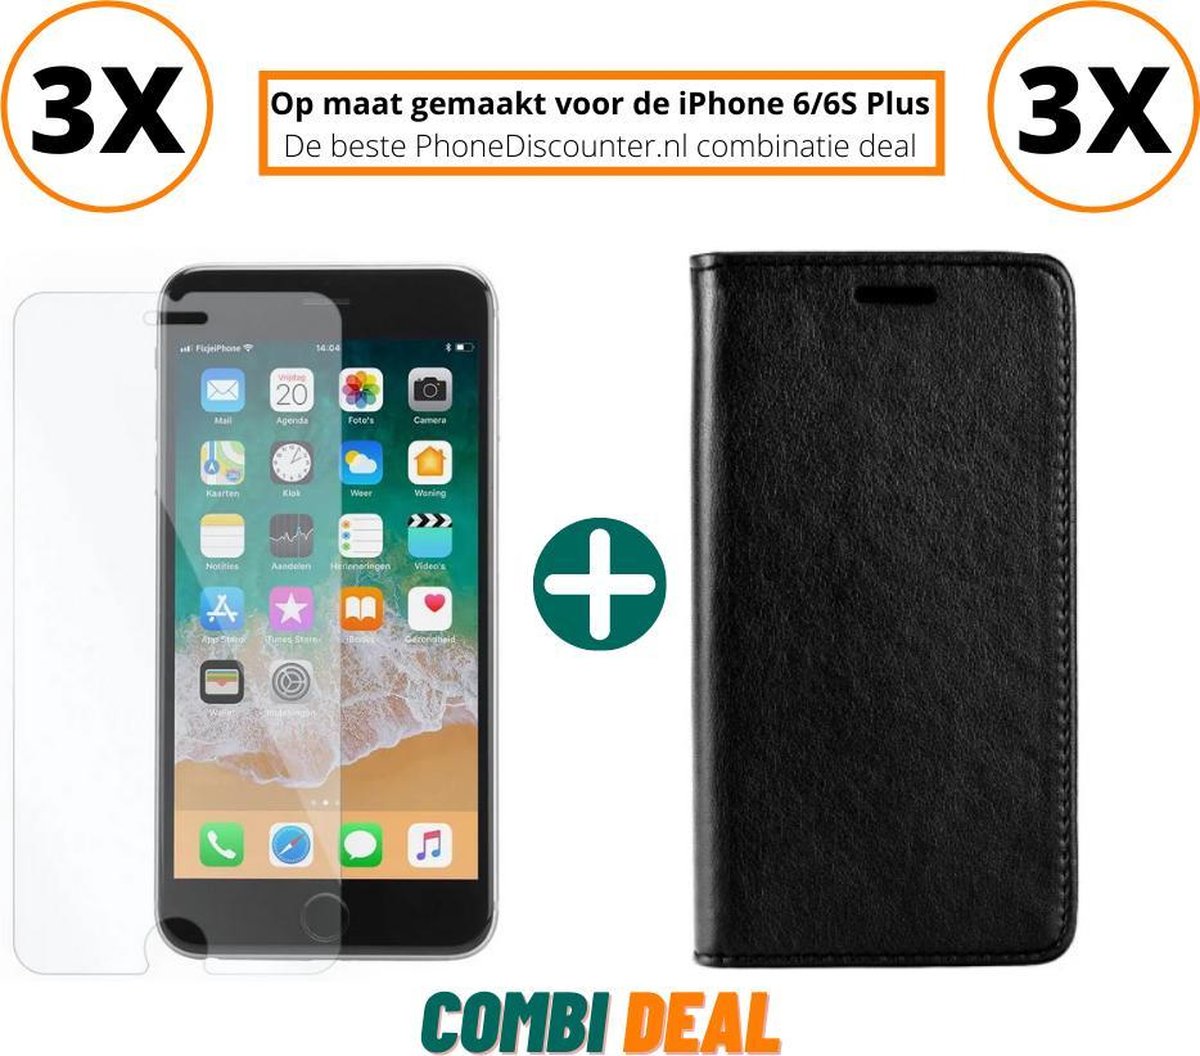 iphone 6s plus hoesje zwart | iPhone 6S Plus A1699 beschermhoes full body 3x | iPhone 6S Plus wallet hoes zwart | 3x hoesje iphone 6s plus apple | iPhone 6S Plus boekhoesje + 3x iPhone 6S Plus tempered glass screenprotector